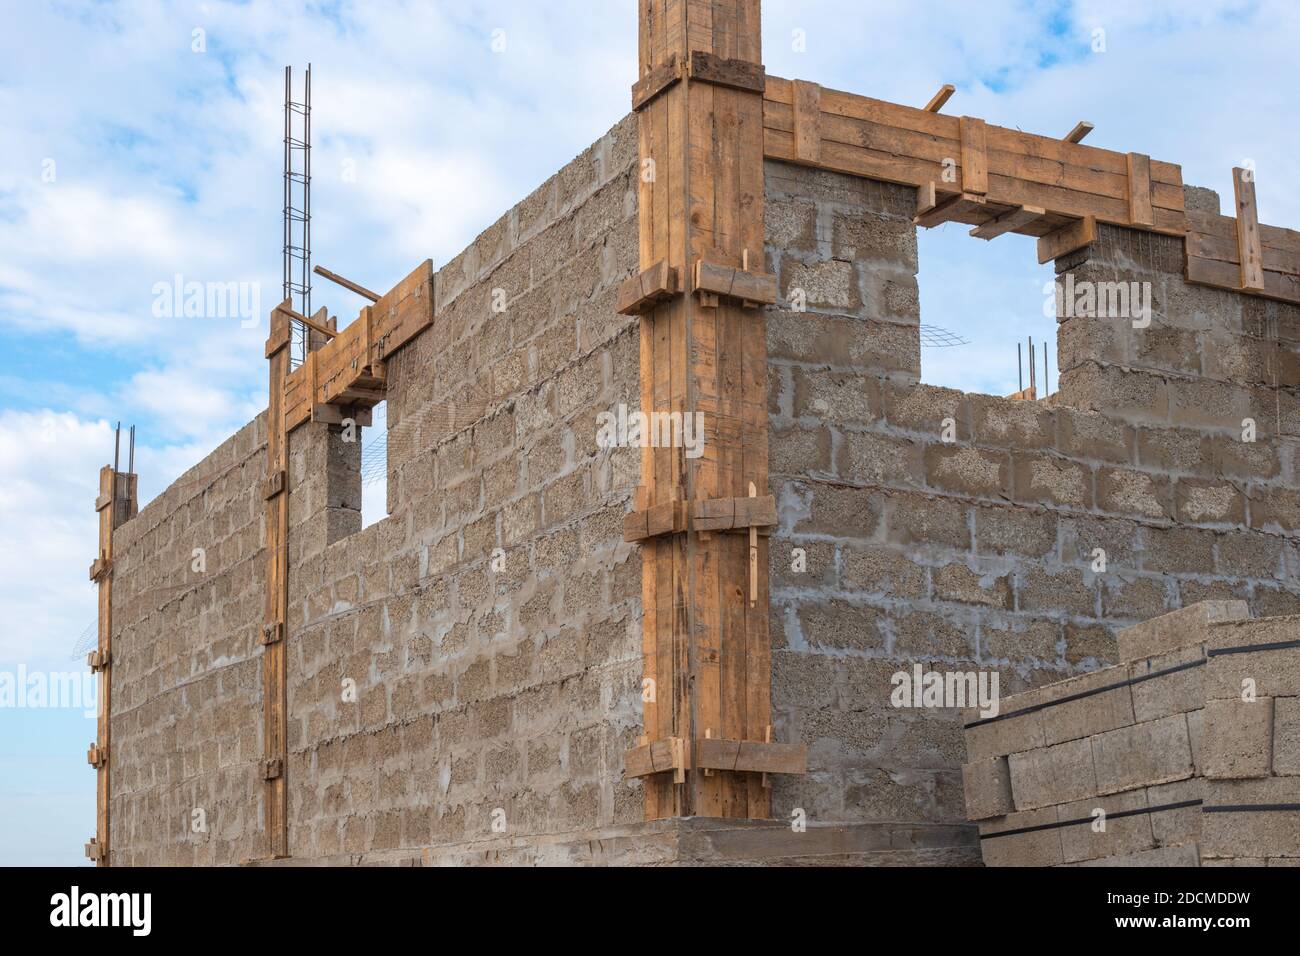 Construction stages. Cinder block house with protruding fittings, ground floor. Stock Photo